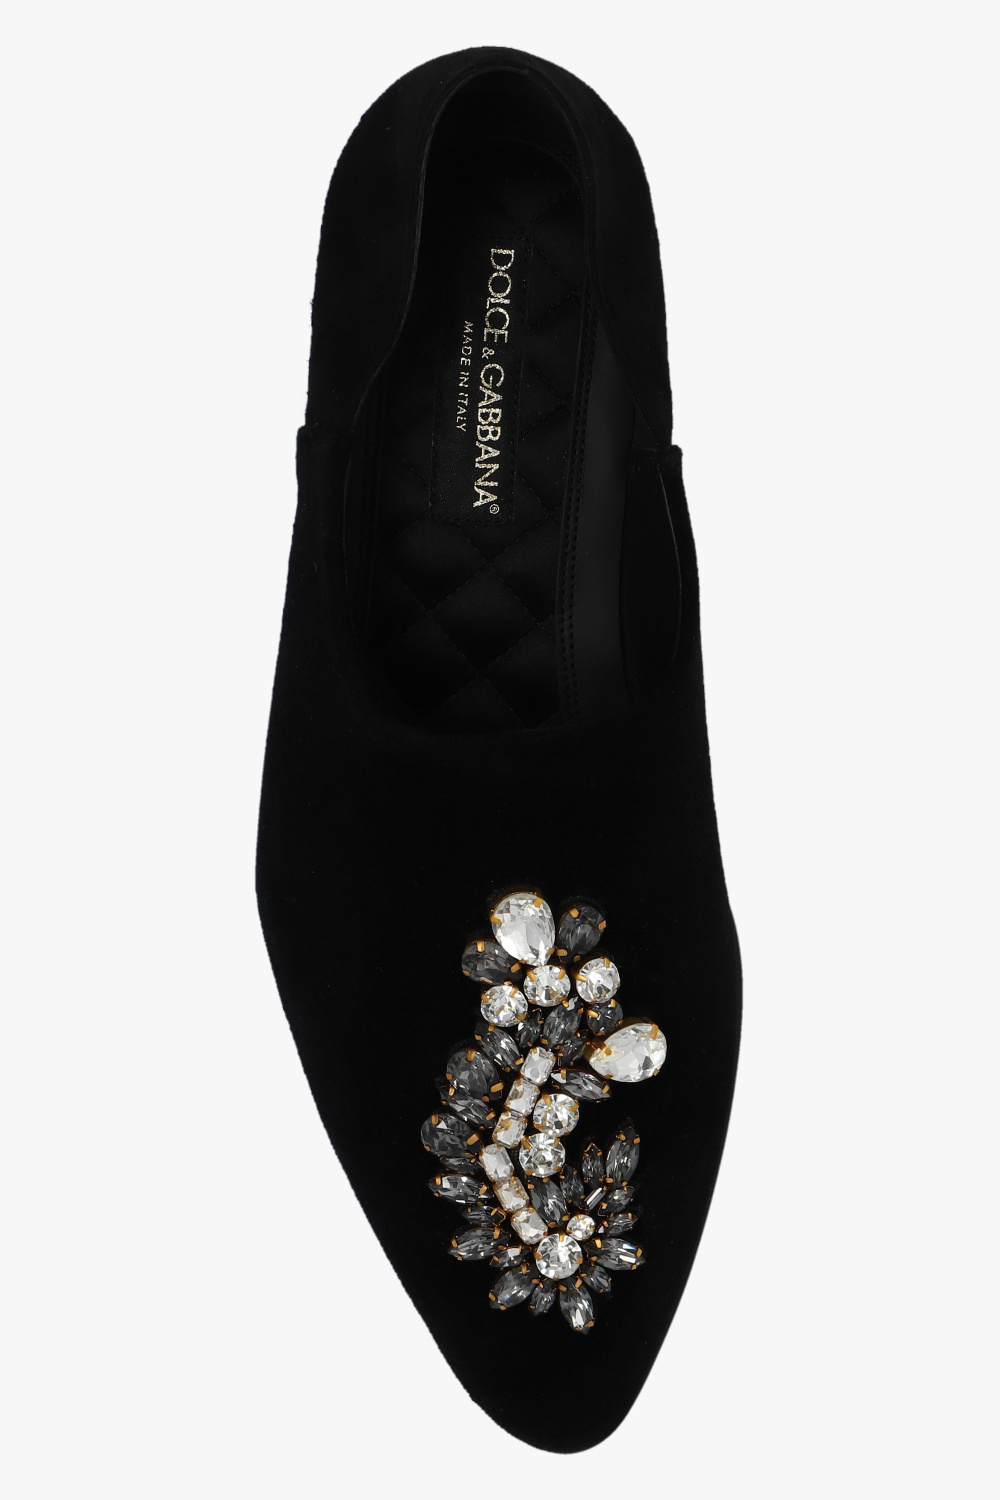 Dolce & Gabbana Slip-on White shoes with crystal appliqué